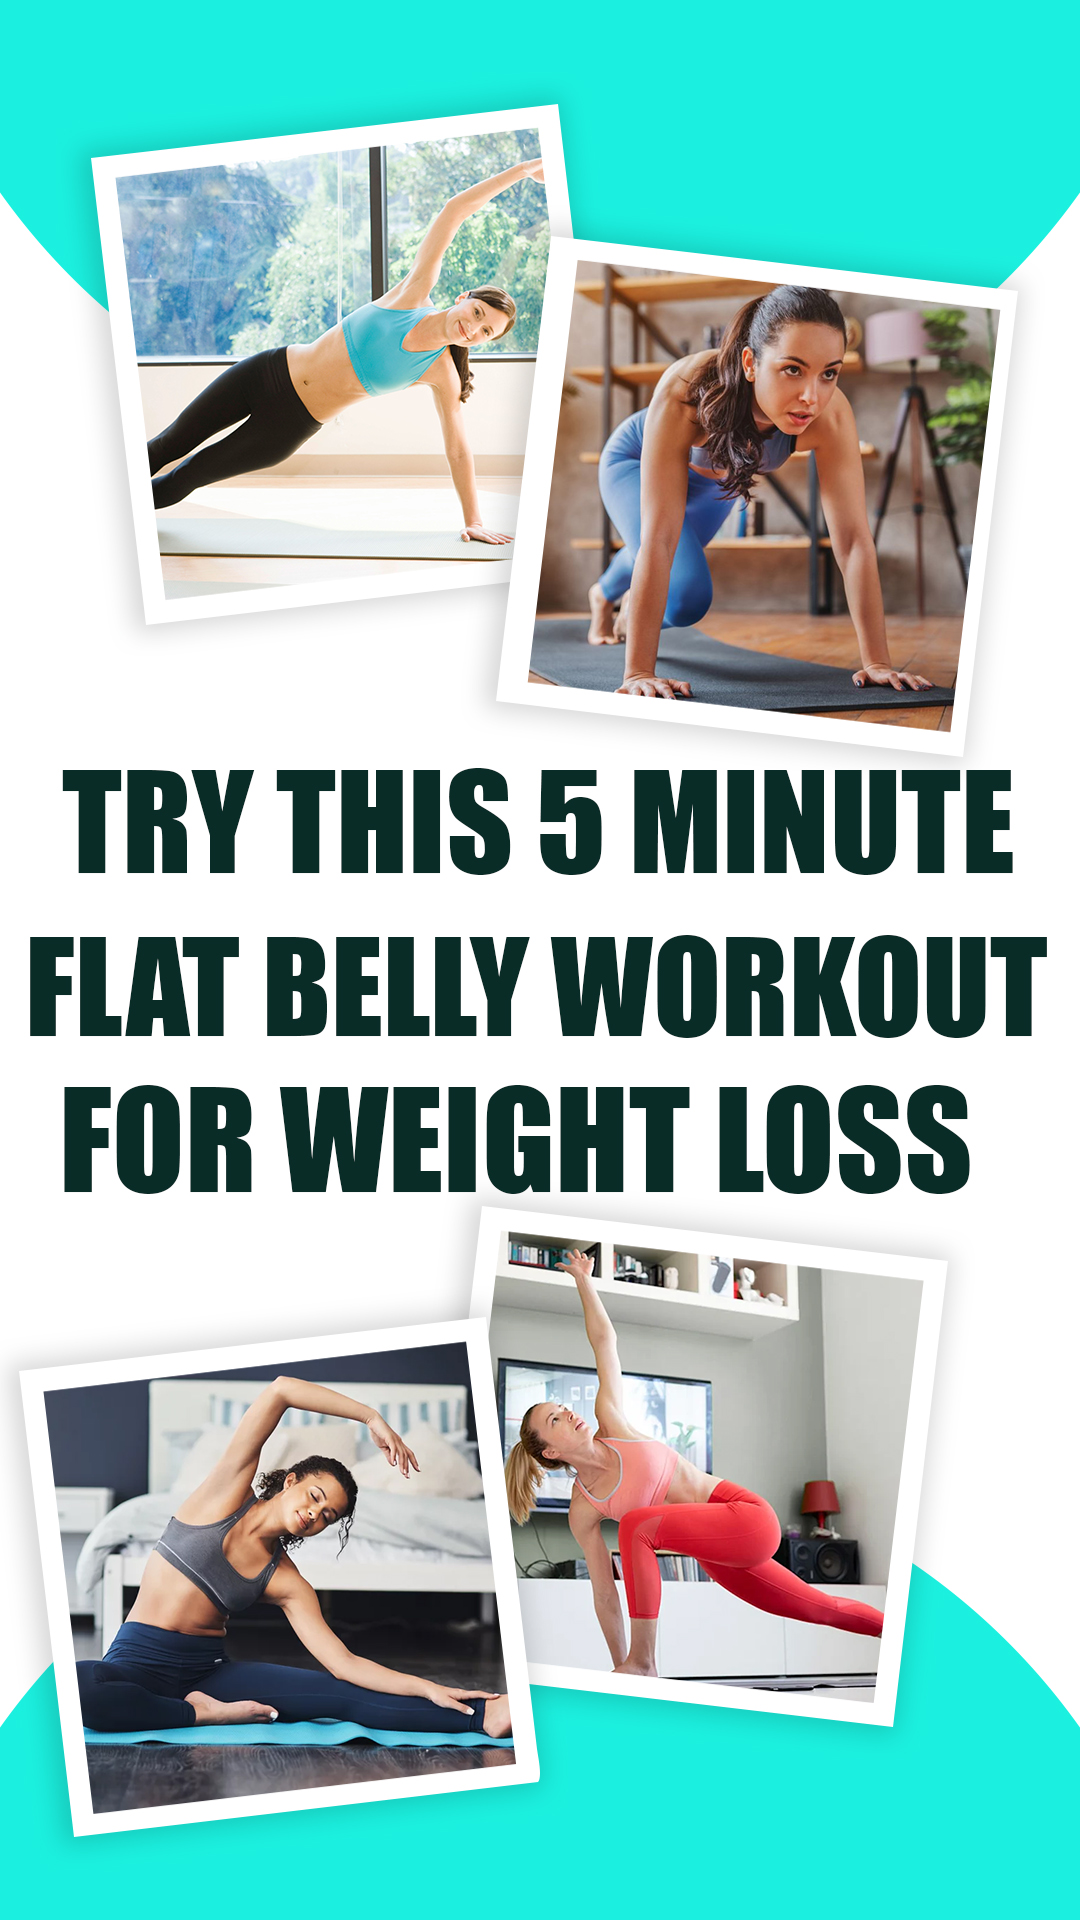 This 5-Minute Flat Belly Workout Can Reduce Belly Fat